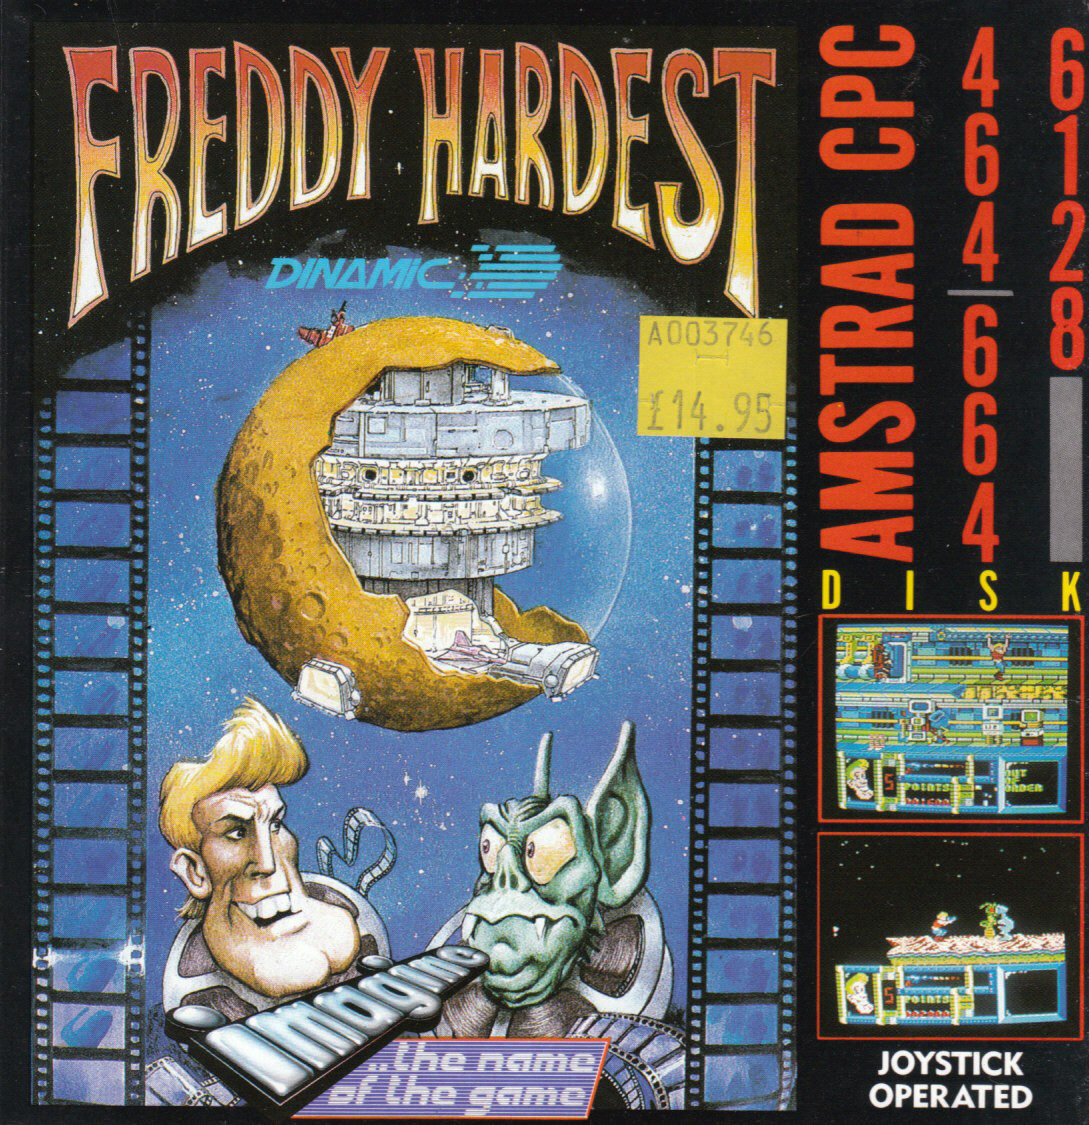 cover of the Amstrad CPC game Freddy Hardest  by GameBase CPC